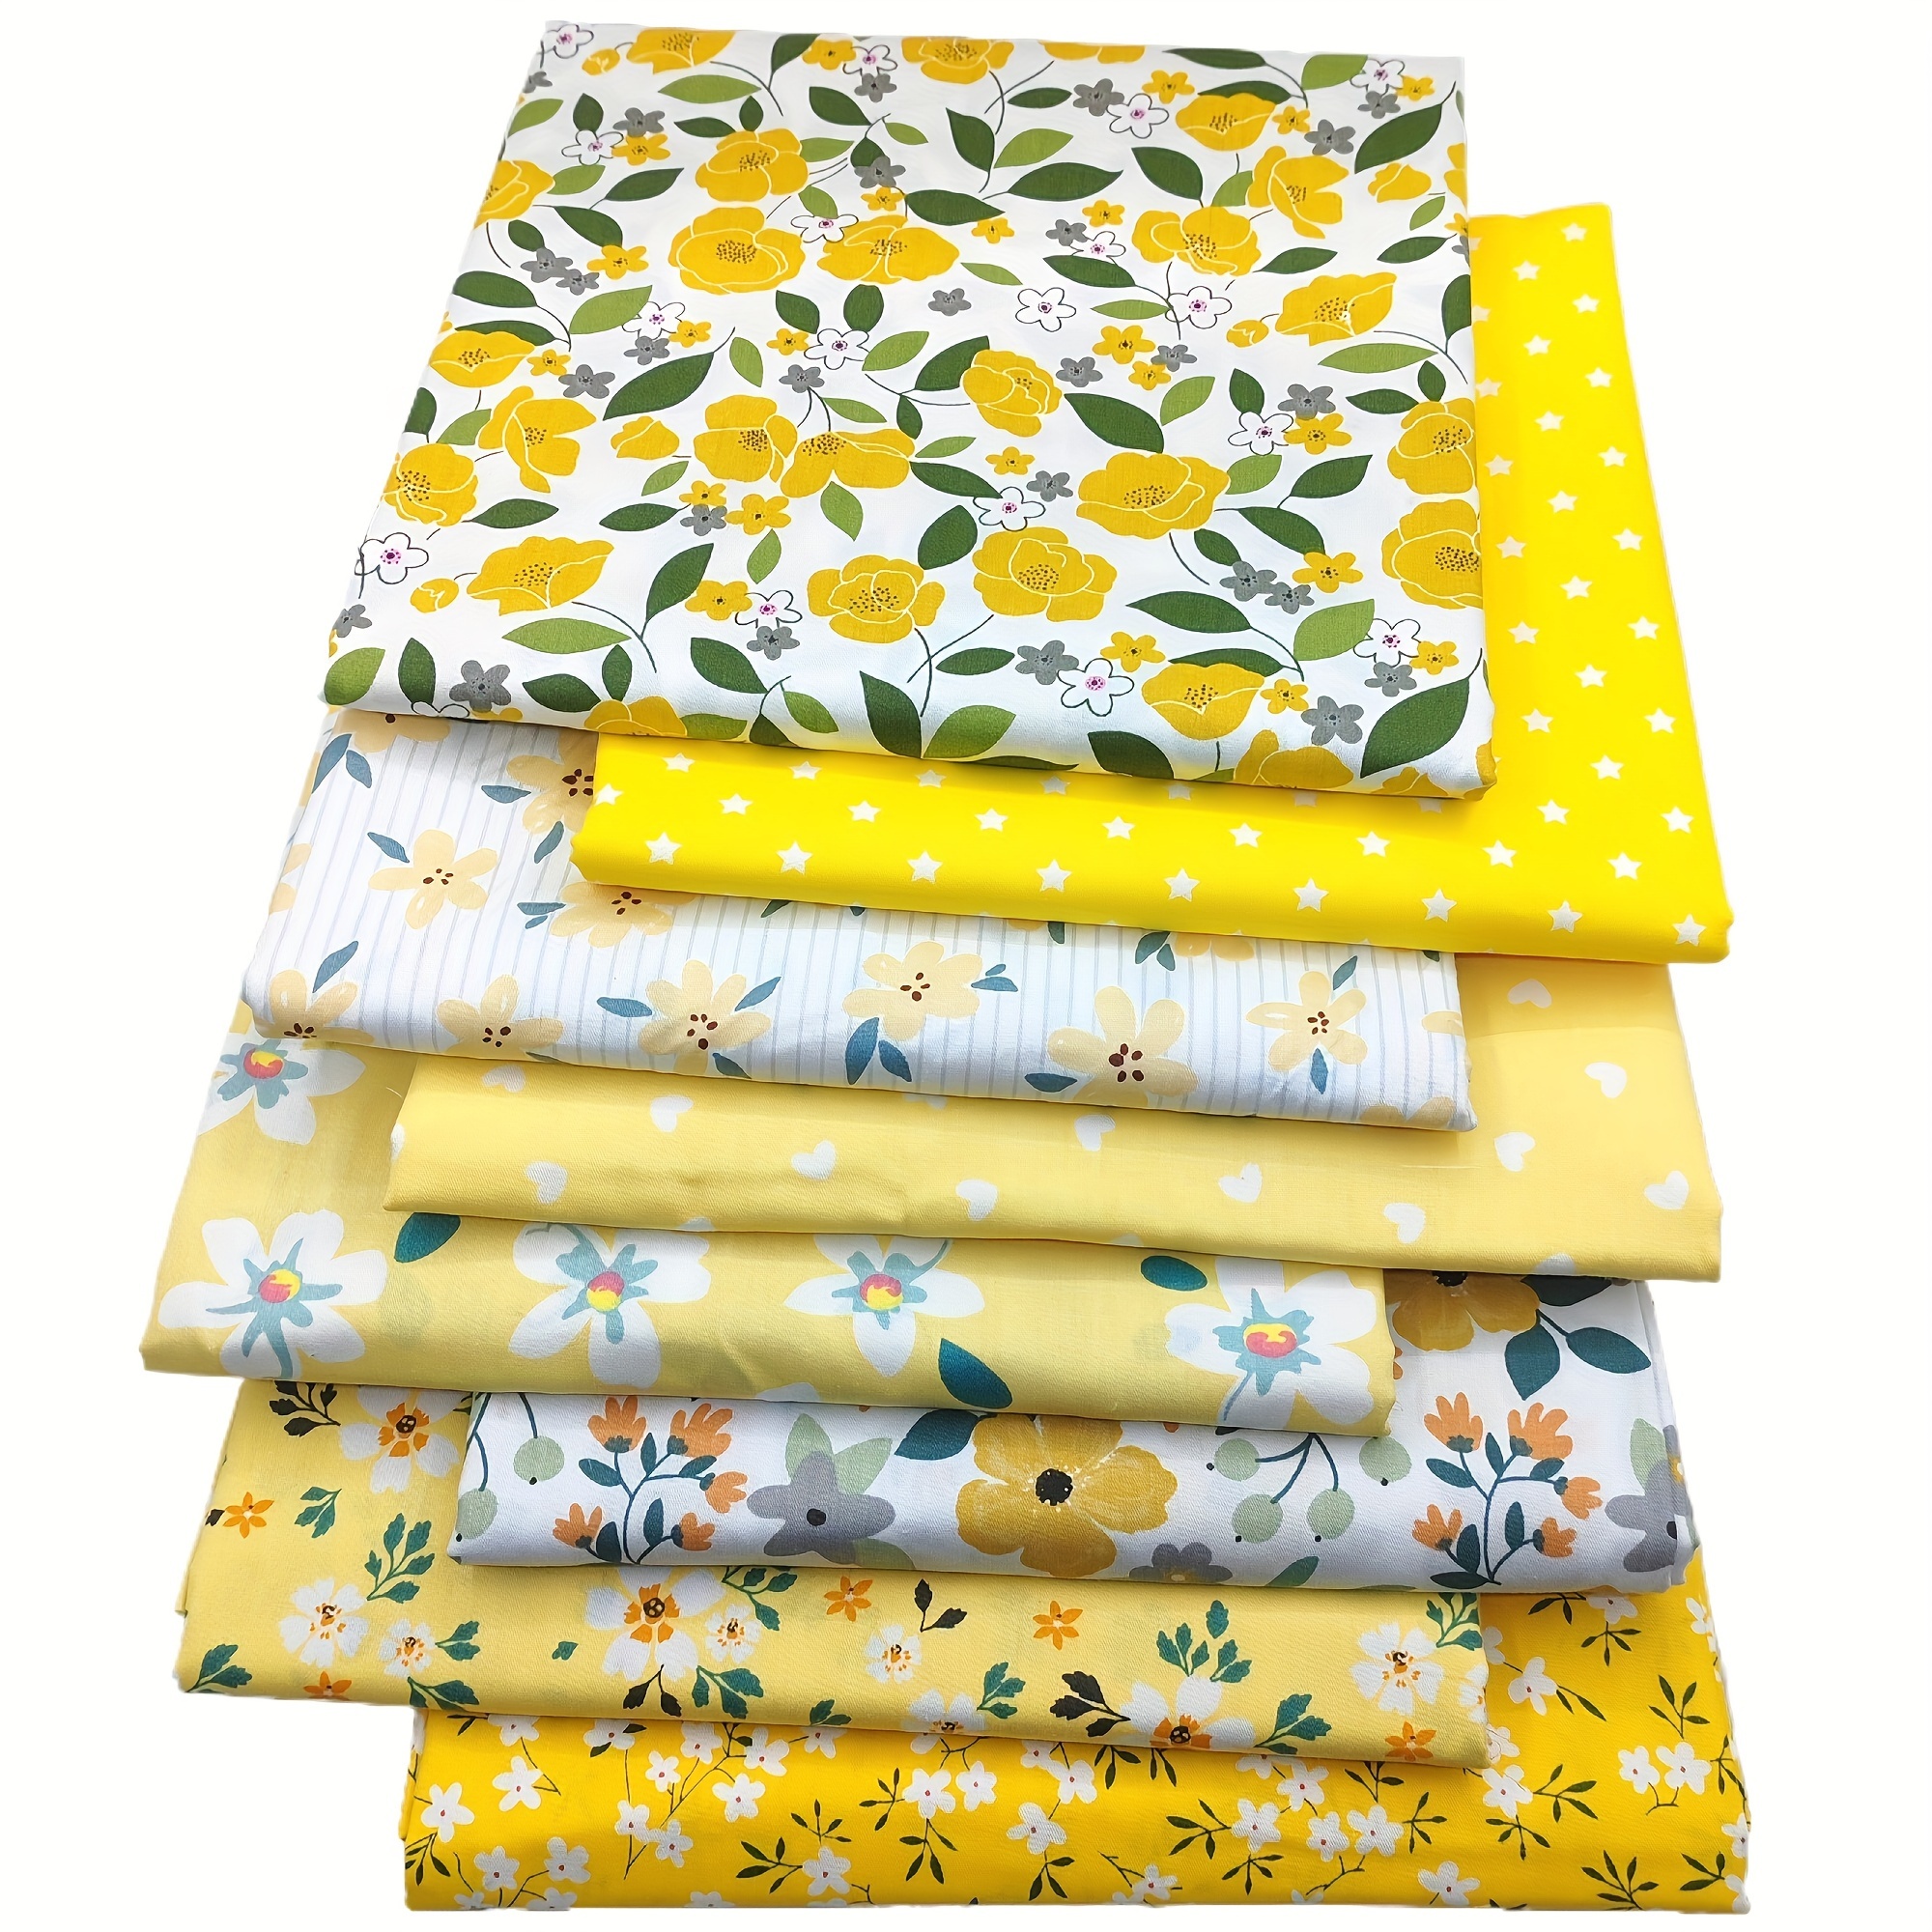 

8pcs Cotton Fabric, Pastoral Yellow Flower Series Printed Twill Fabric, Precut Squares Diy Craft Quilting Handmade Patchwork Cloth Doll Clothes Fabric Bedding Fabric Set